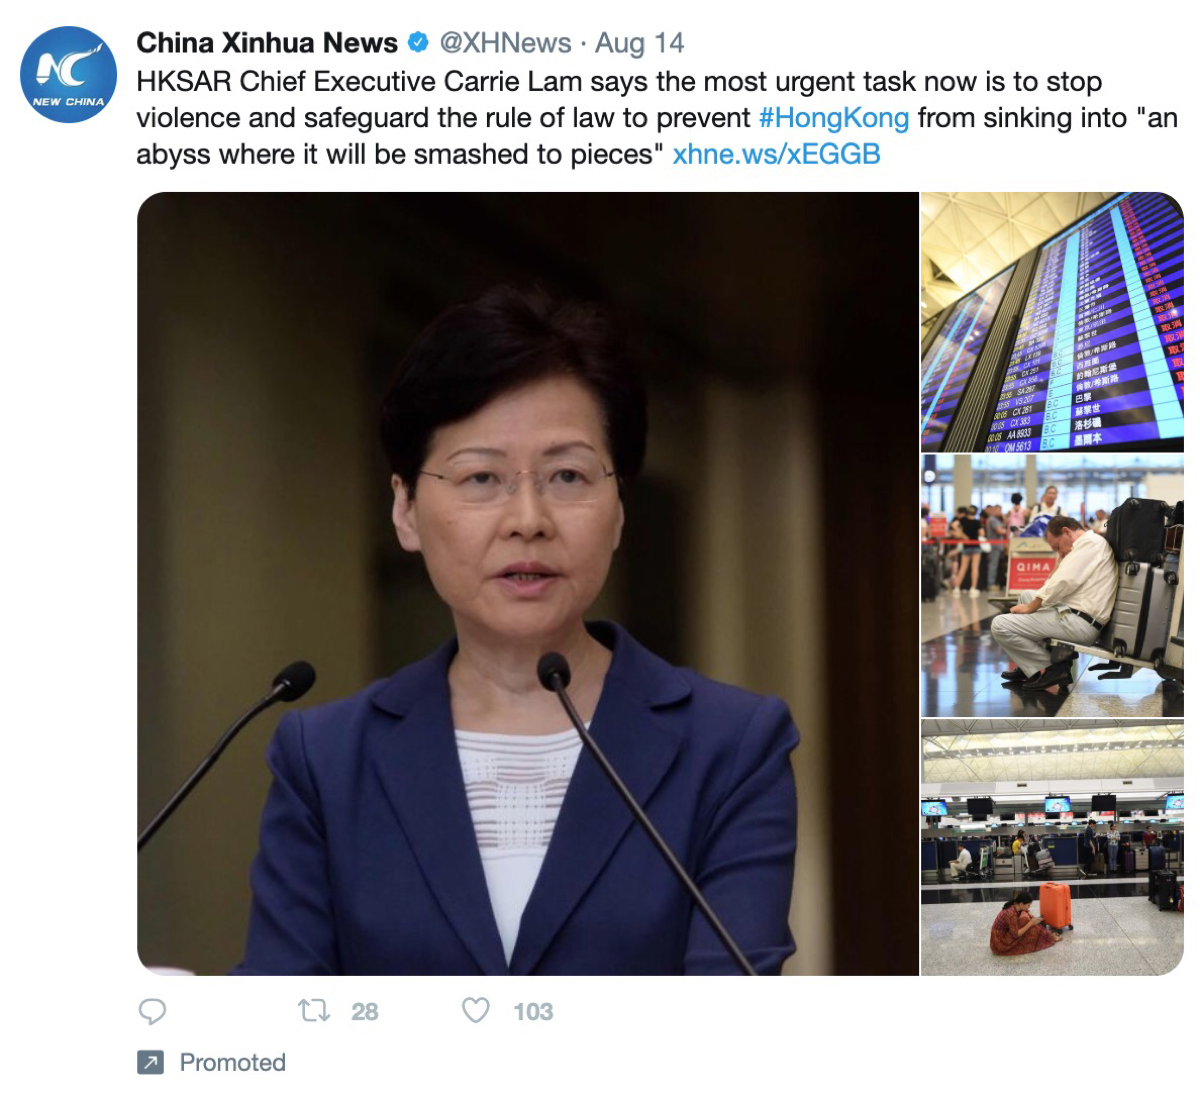 Promoted tweets from China Xinhua News featured in Twitter’s ad transparency tool.